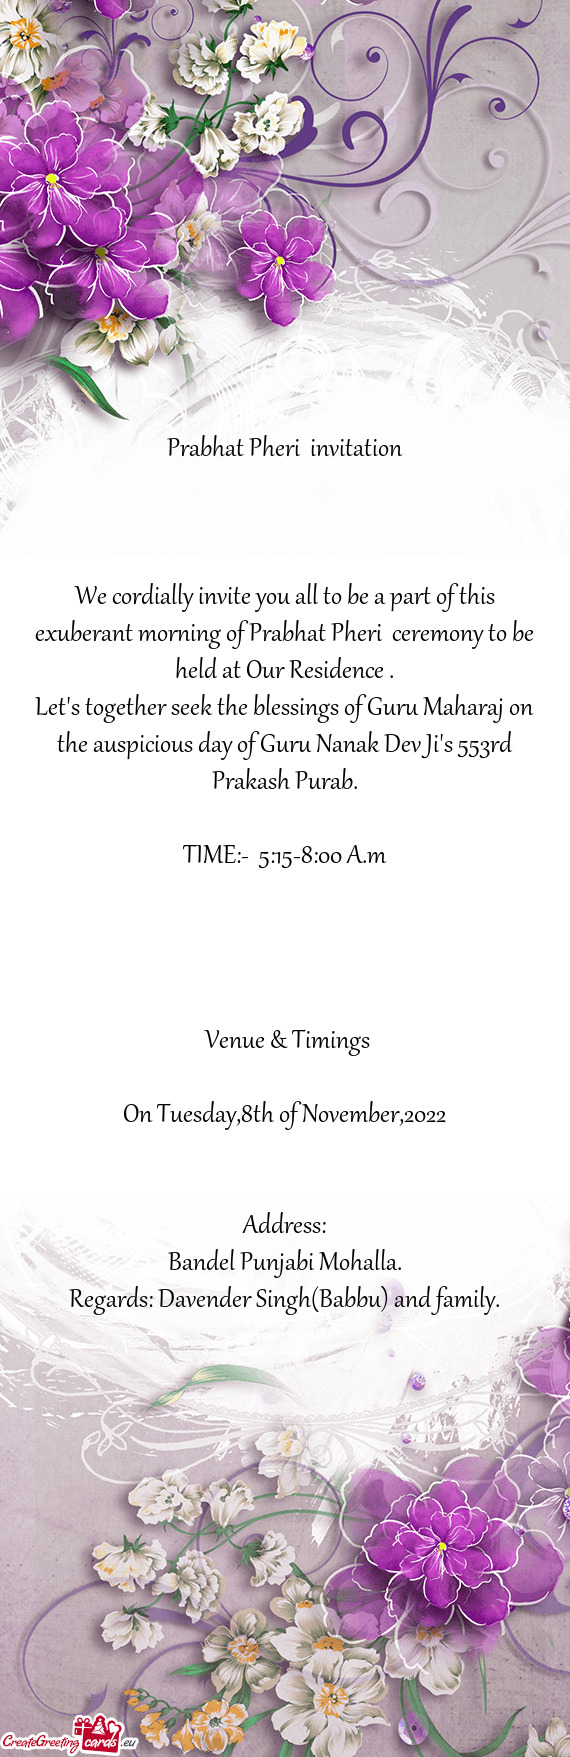 We cordially invite you all to be a part of this exuberant morning of Prabhat Pheri ceremony to be